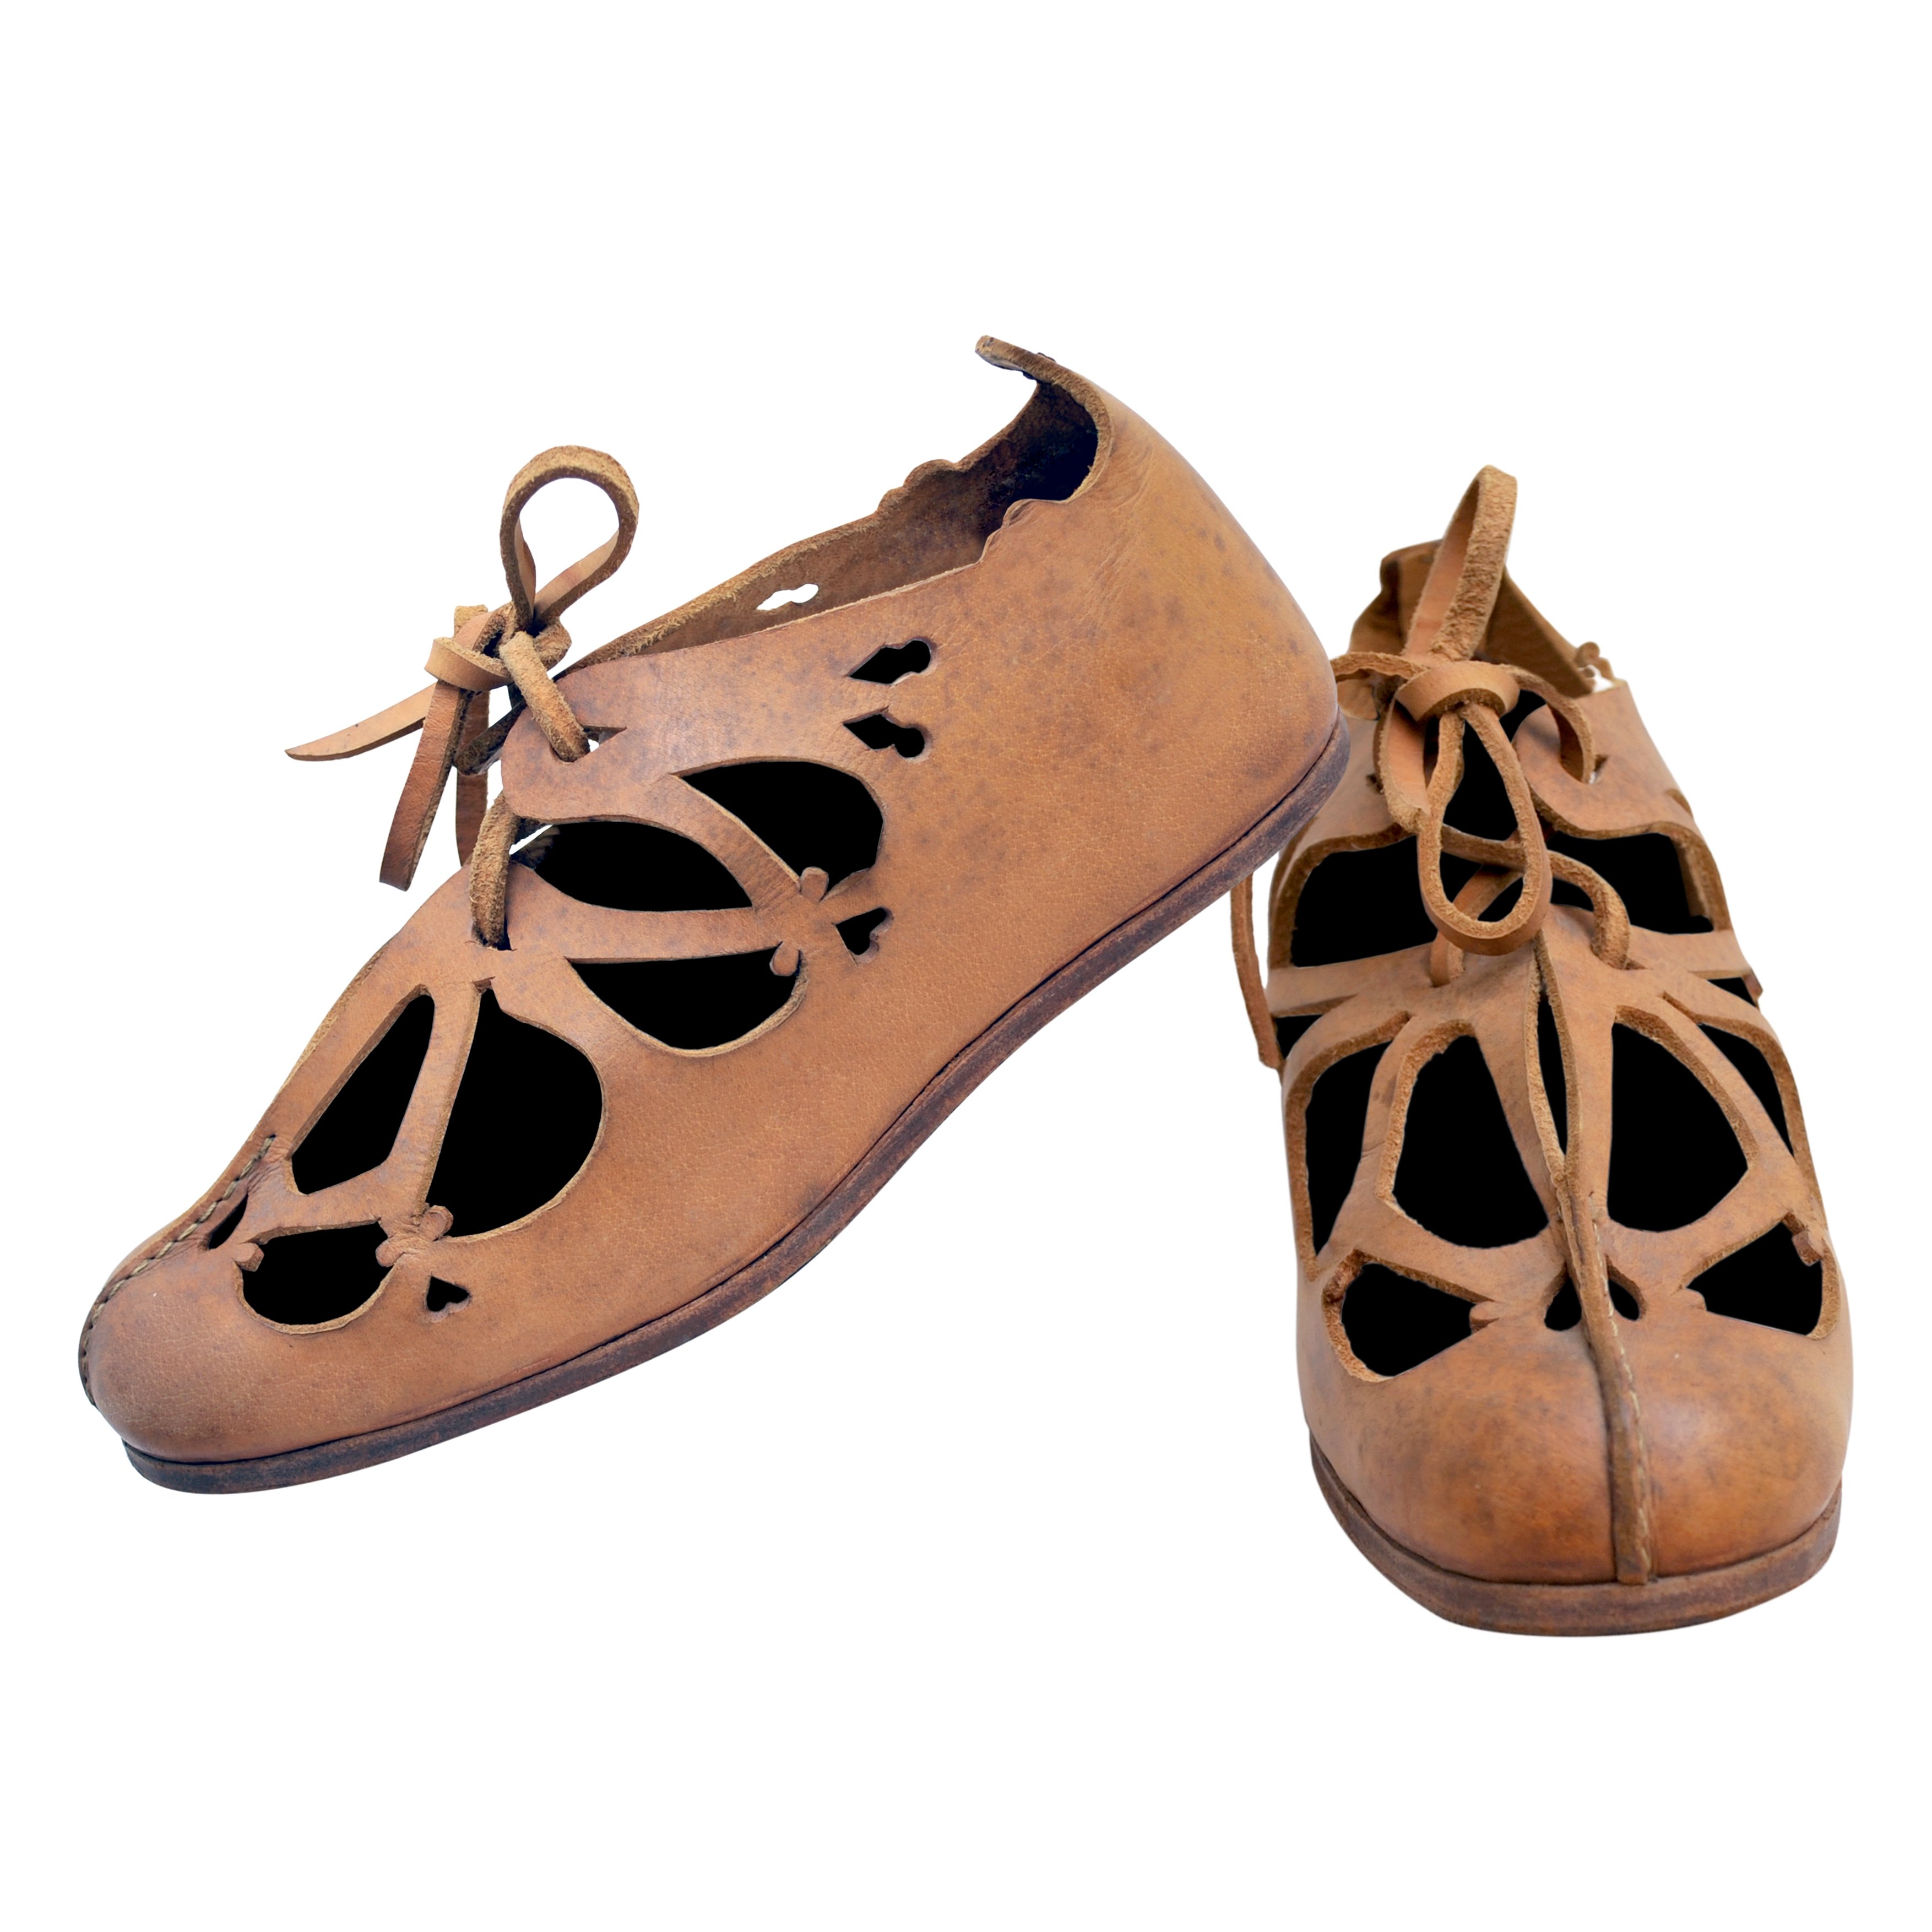 Roman shoes of the Bar Hill type with Hobils, Size 12